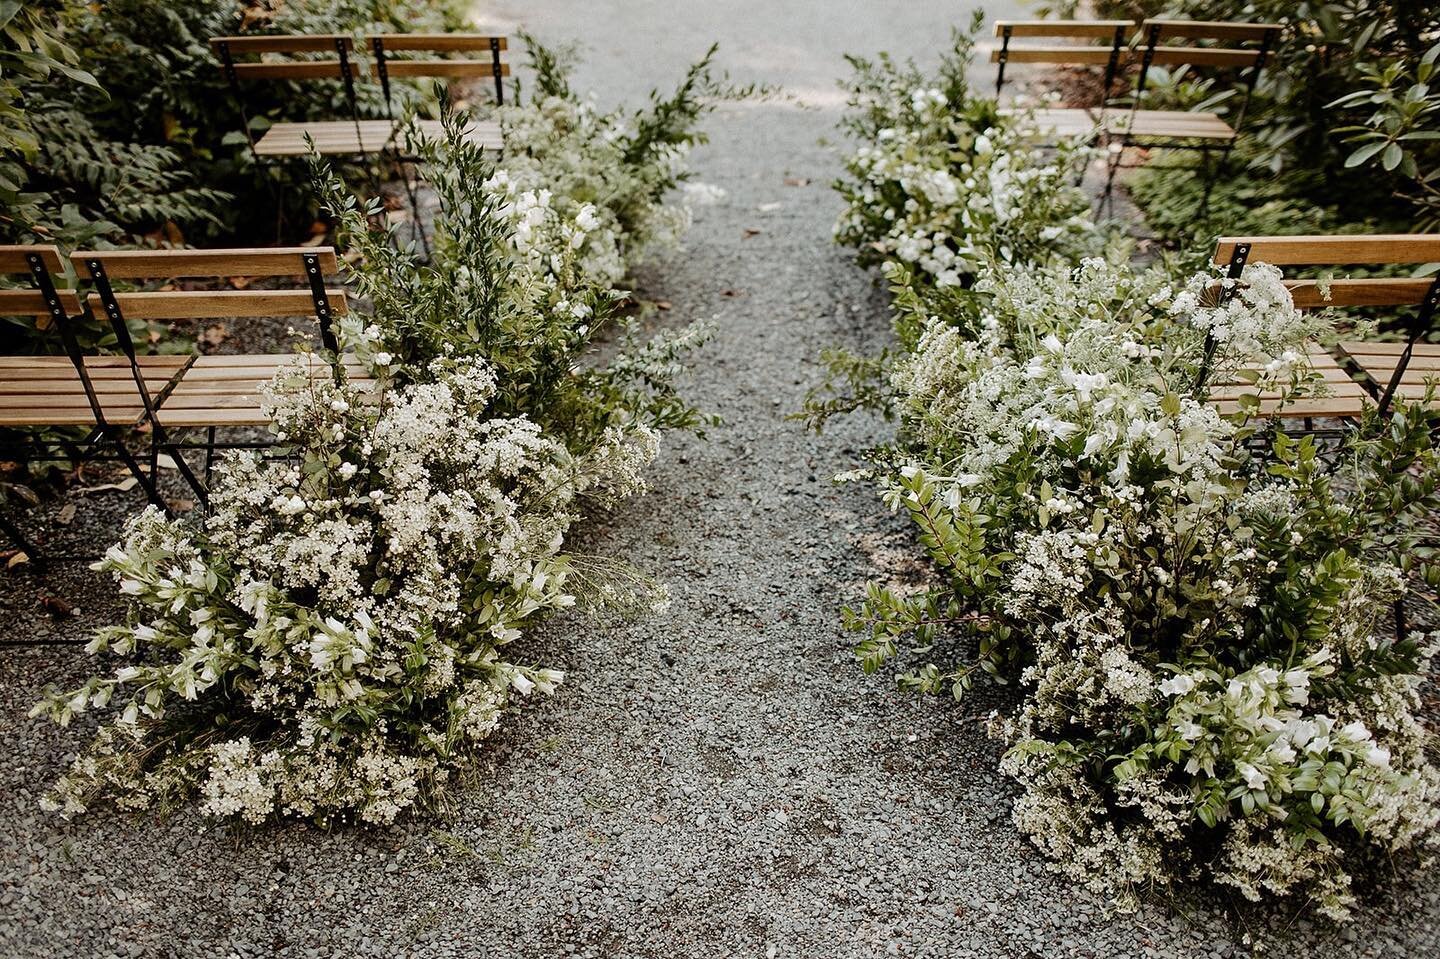 A wild, overgrown aisle for your small ceremony.
Photography: @allisonharp 
Chairs: @wandereventrentals 
Venue: @dunn.gardens 
Planning, design, and florals: @julietandlou